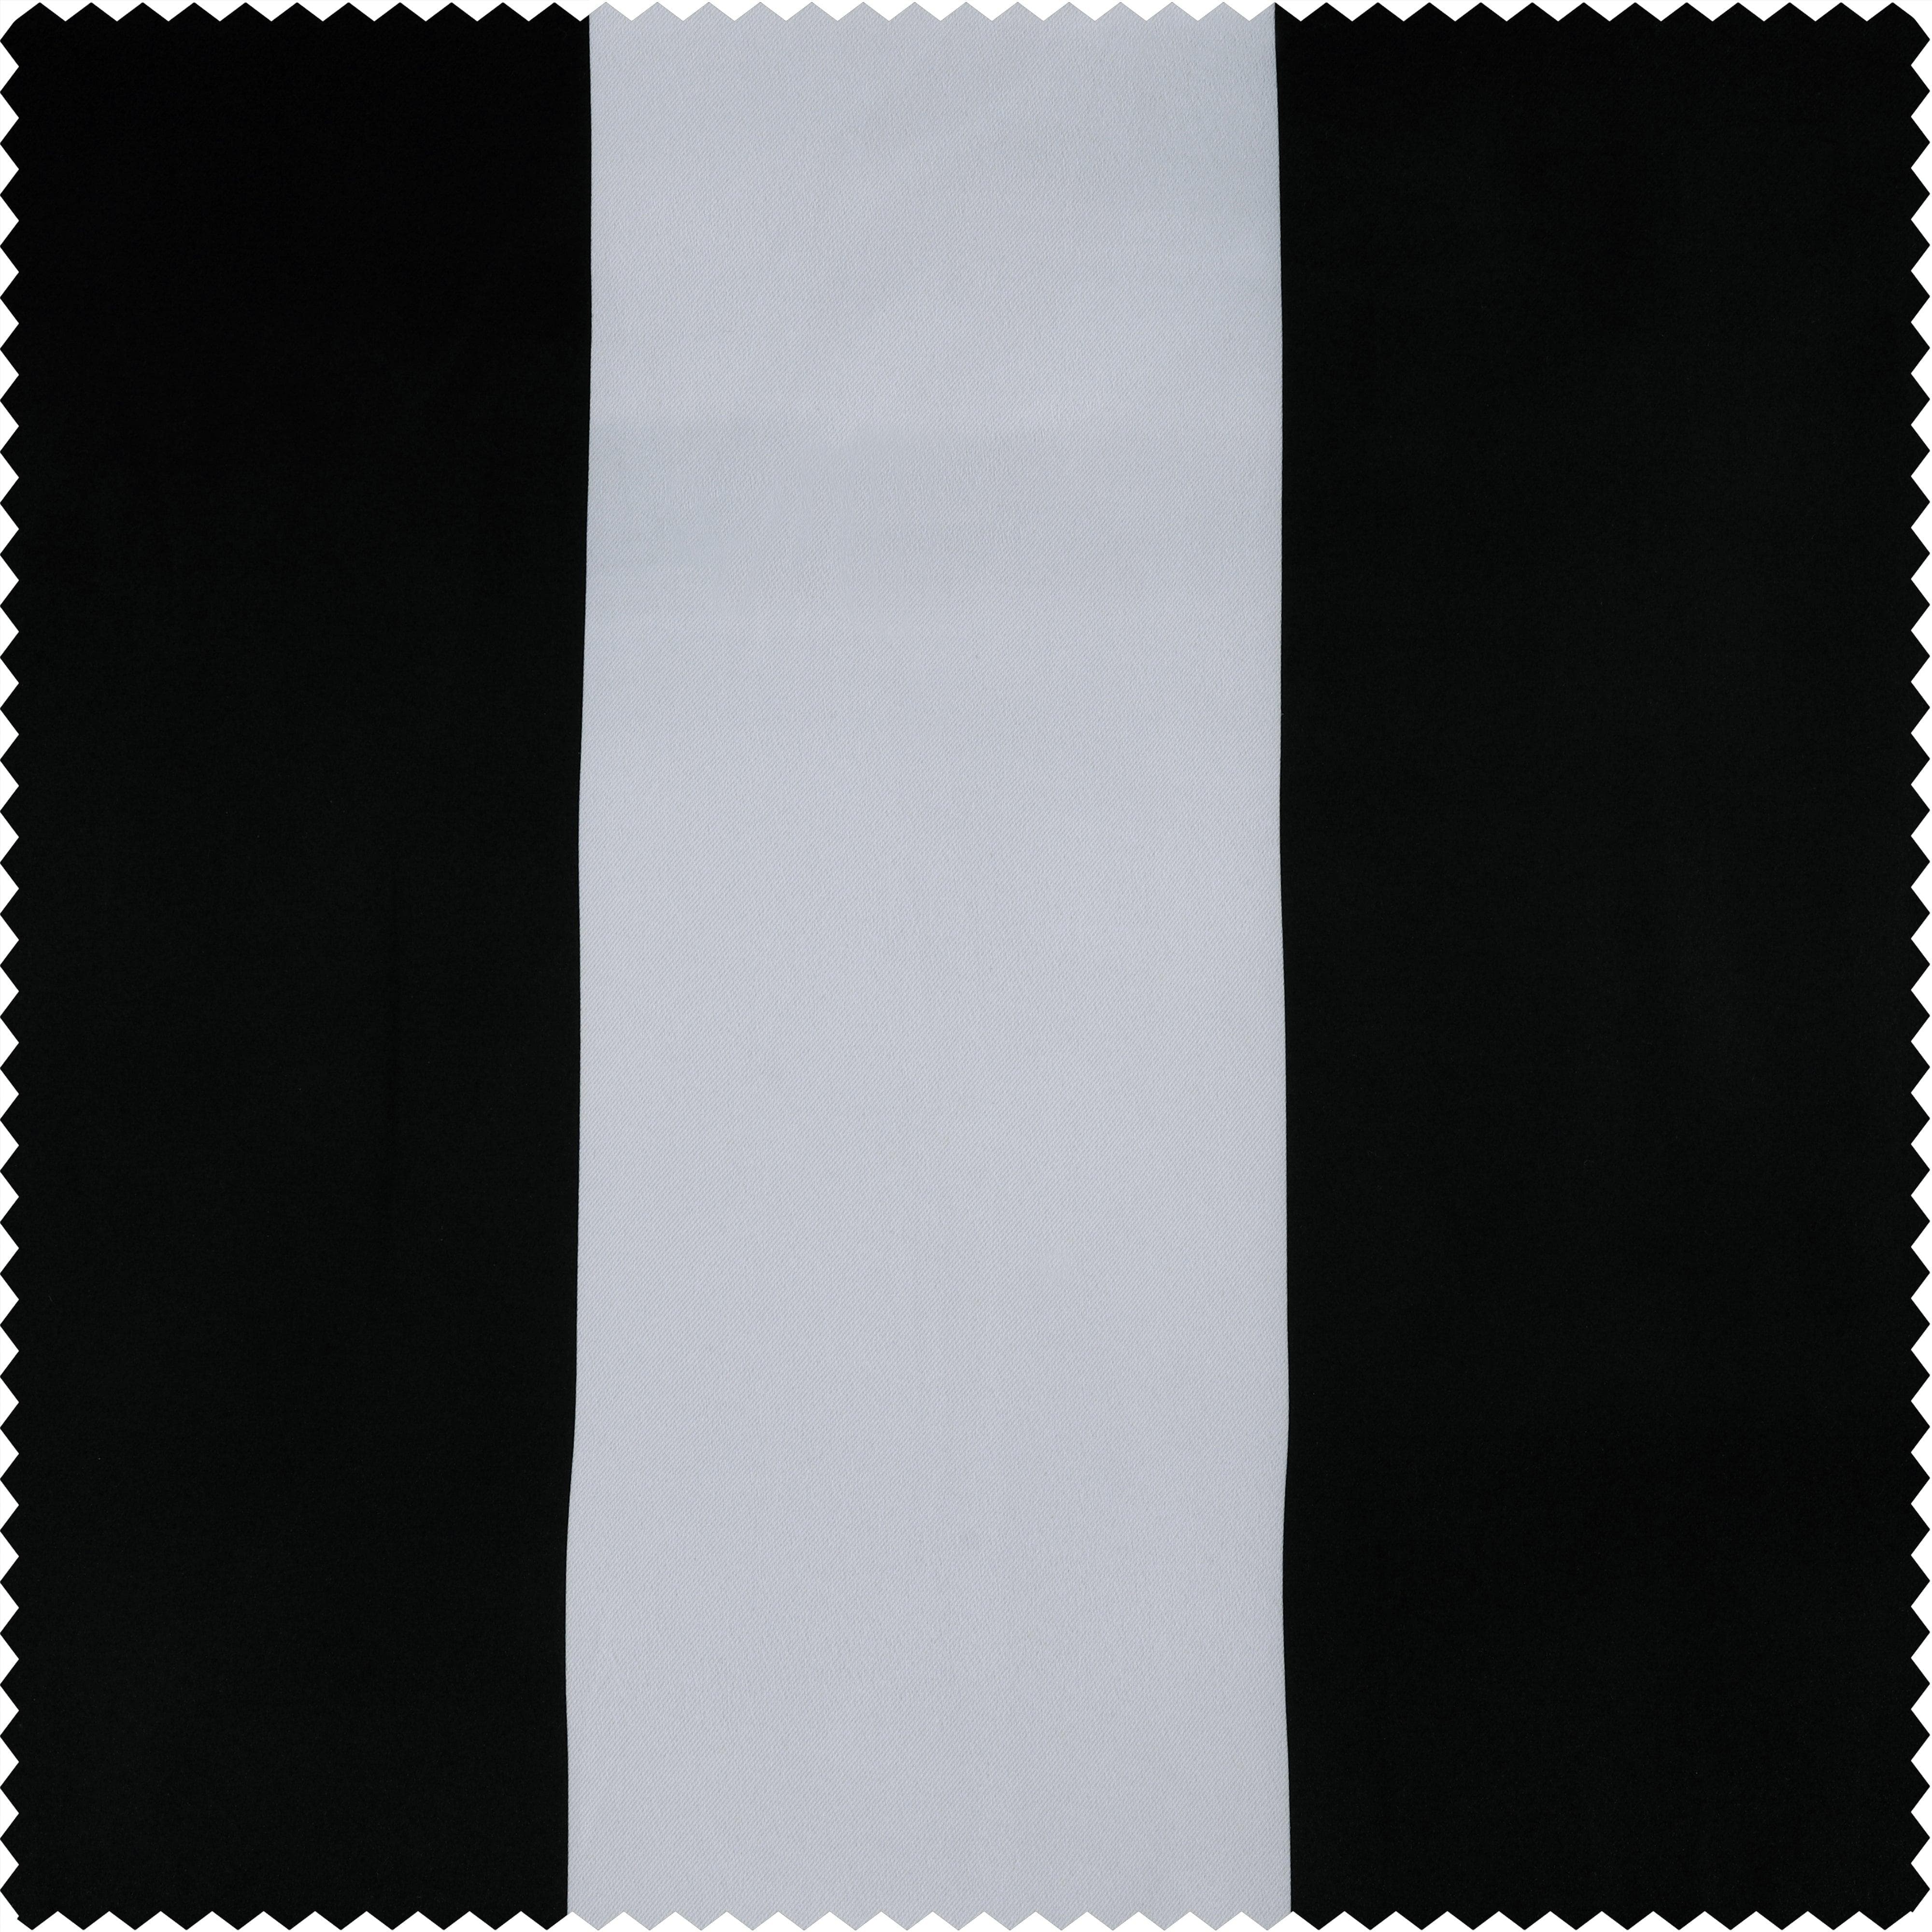 Awning Black & Fog White Striped Printed Polyester Swatch